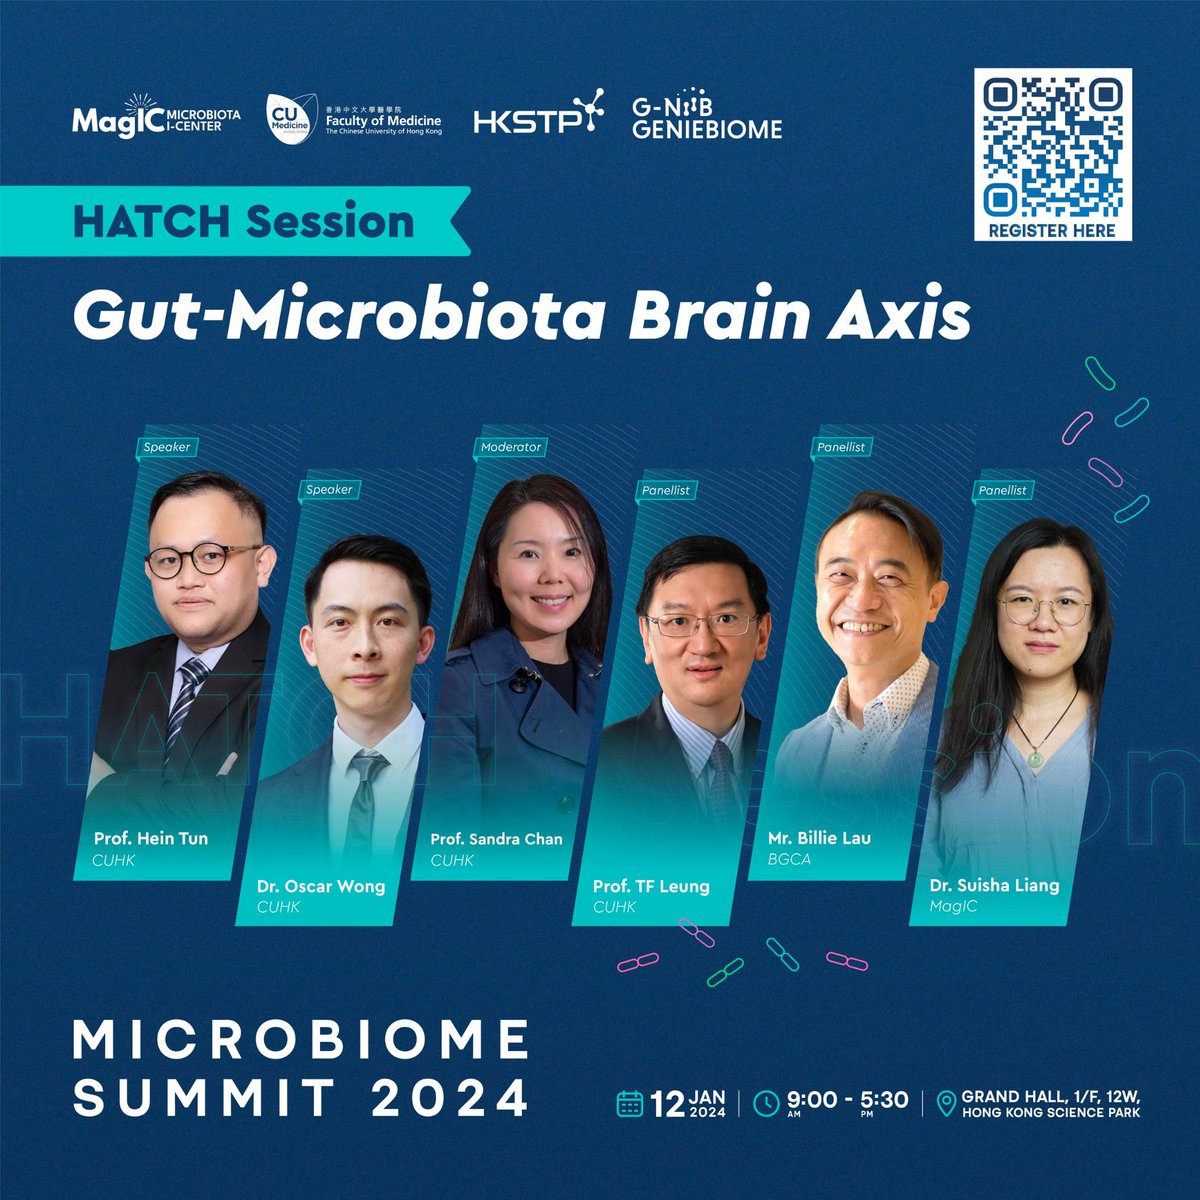 HATCH Session – Gut Microbiota Brain Axis! 🧠🦠 📅 Date: 12 Jan 2024 (Fri) ⏰ Time: PM Session 🏢 Venue: The Grand Hall, 12W, HKSTP 🎟️ Register NOW: lnkd.in/gxF4hGyr Gut Microbiota Brain Axis - focus on translational research, community service, and child health.